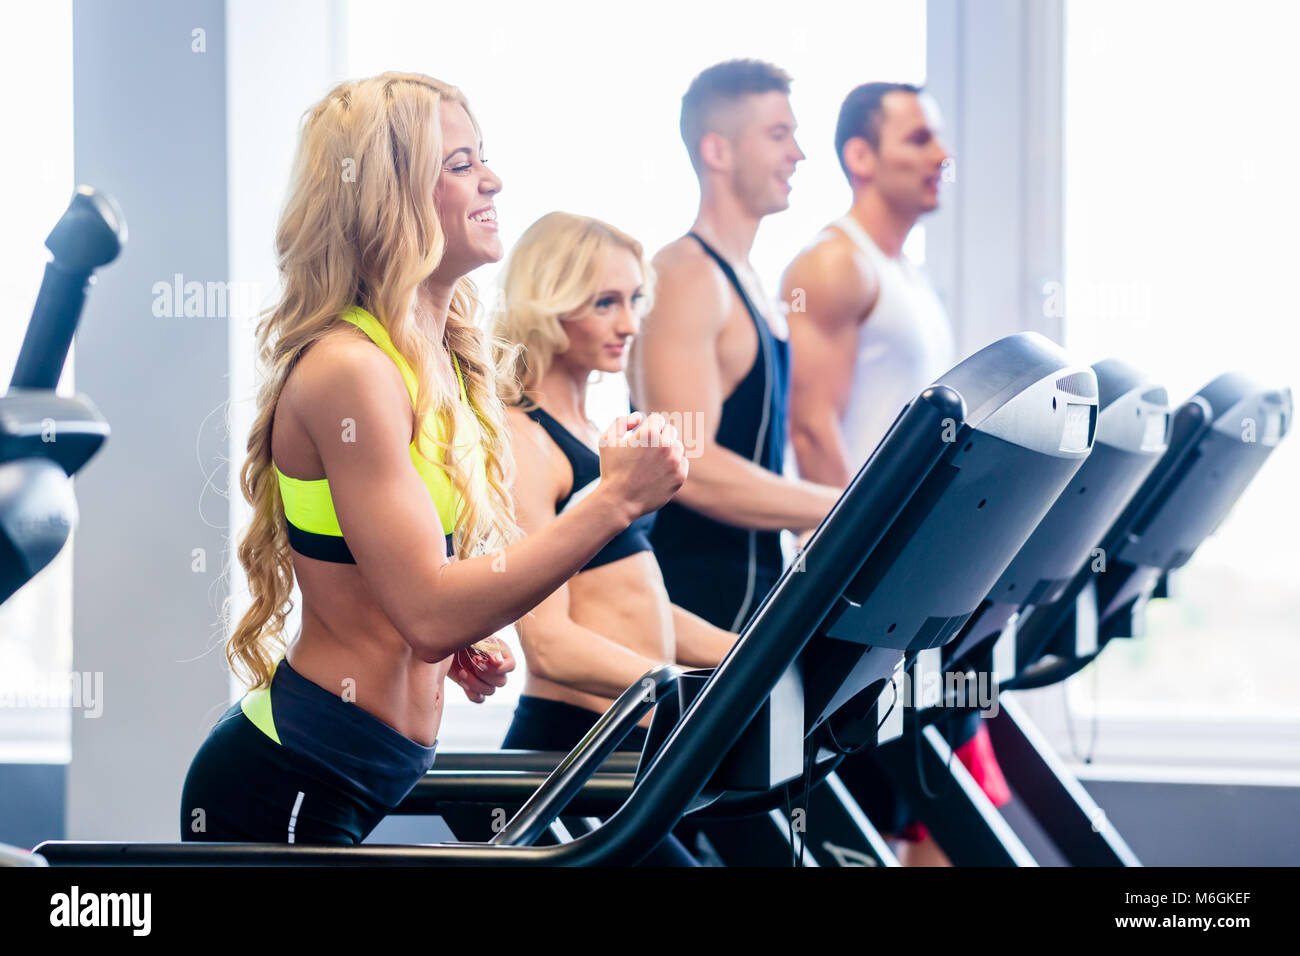 Treadmill group exercising in fitness gym Stock Photo